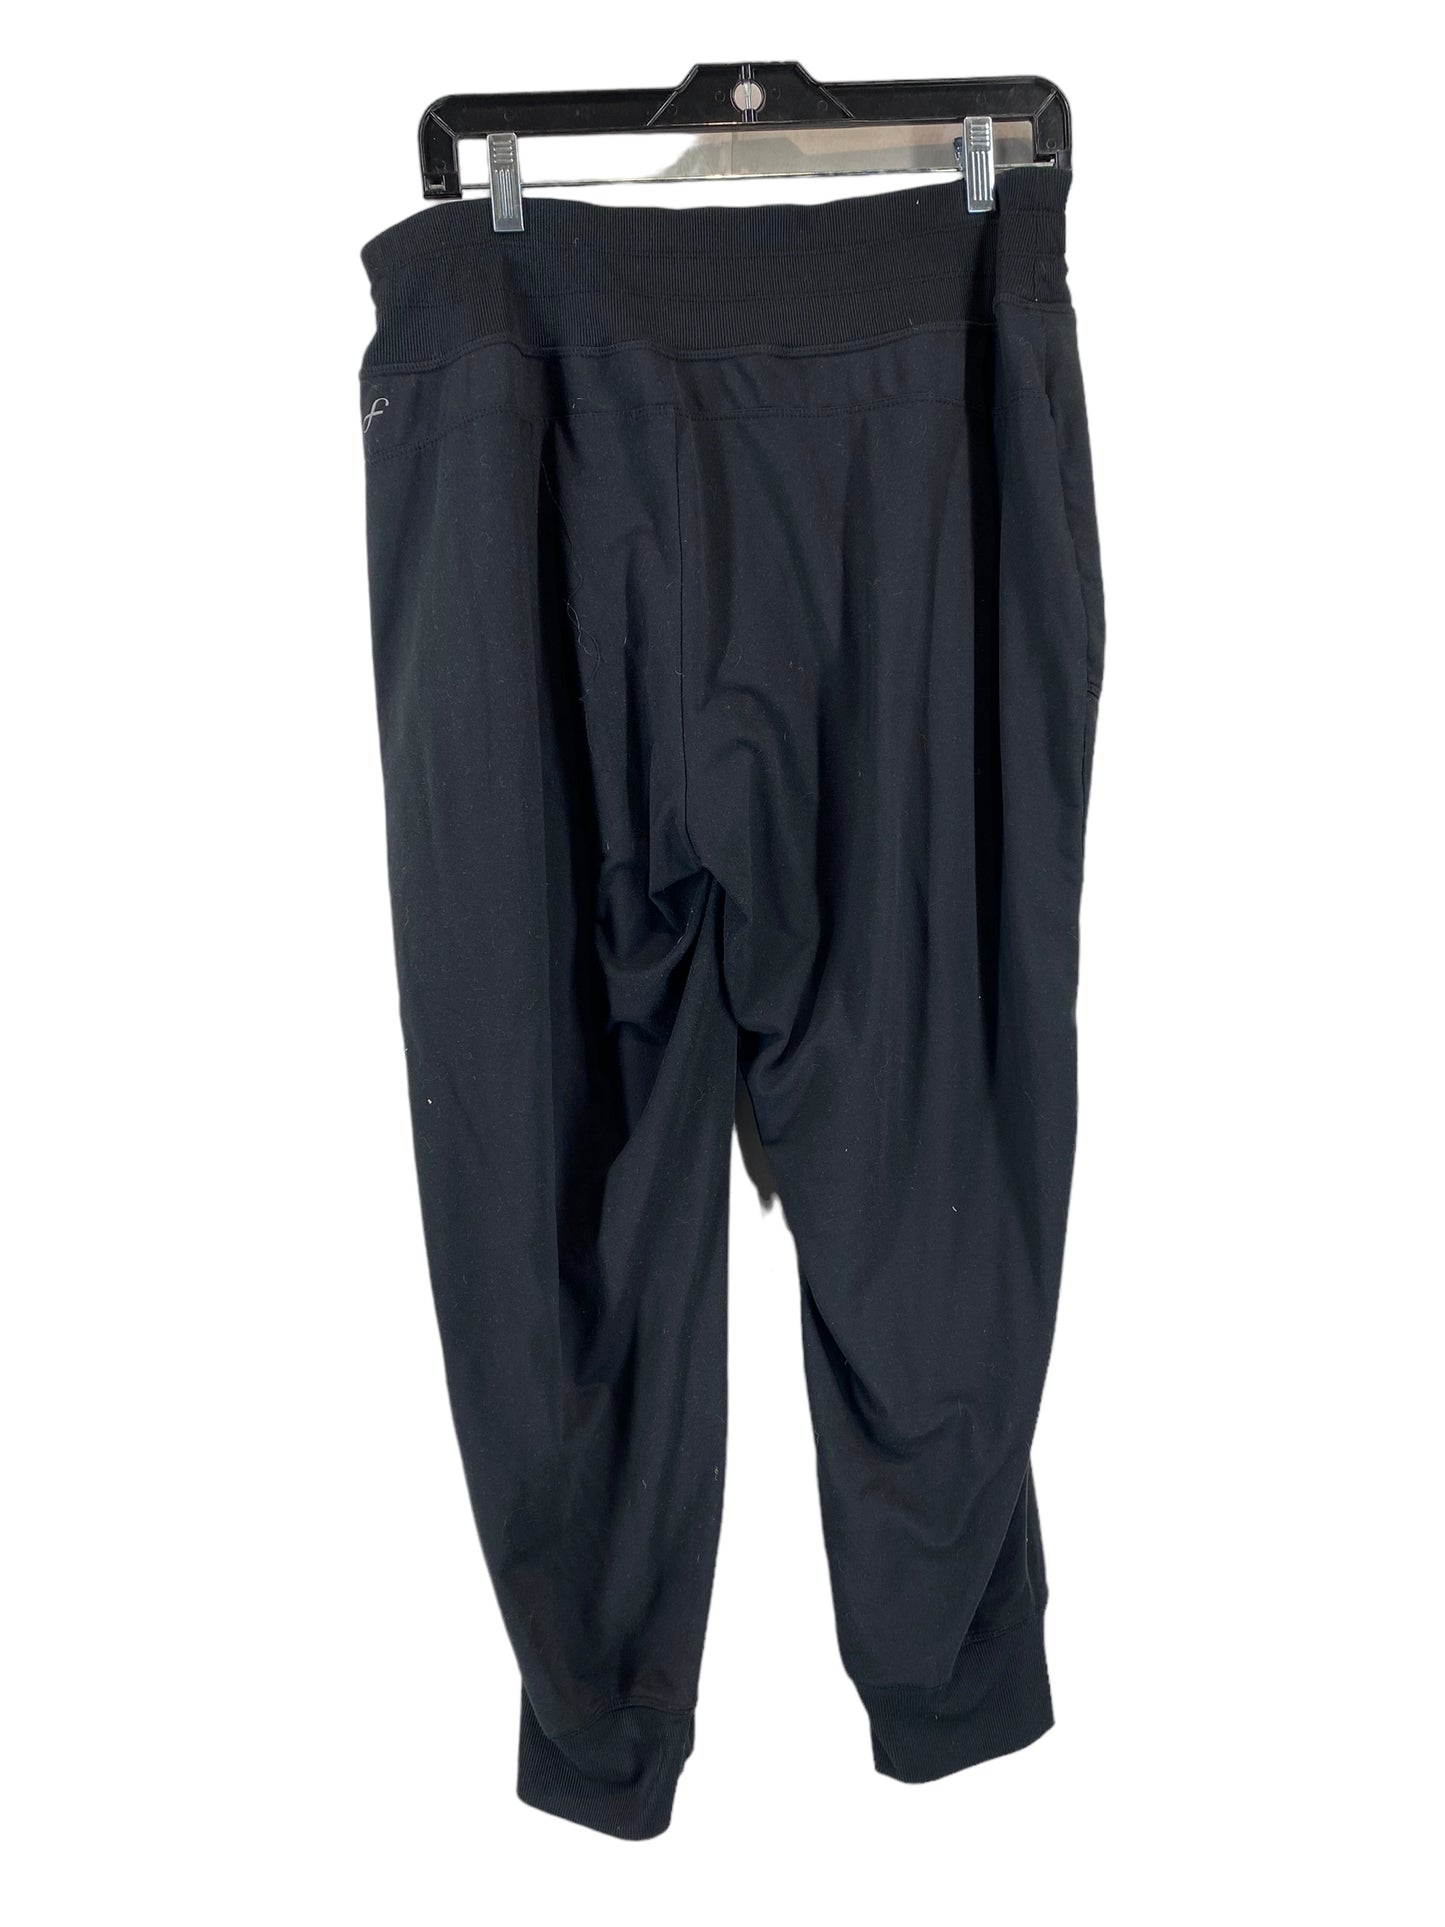 Athletic Pants By Clothes Mentor  Size: Xl